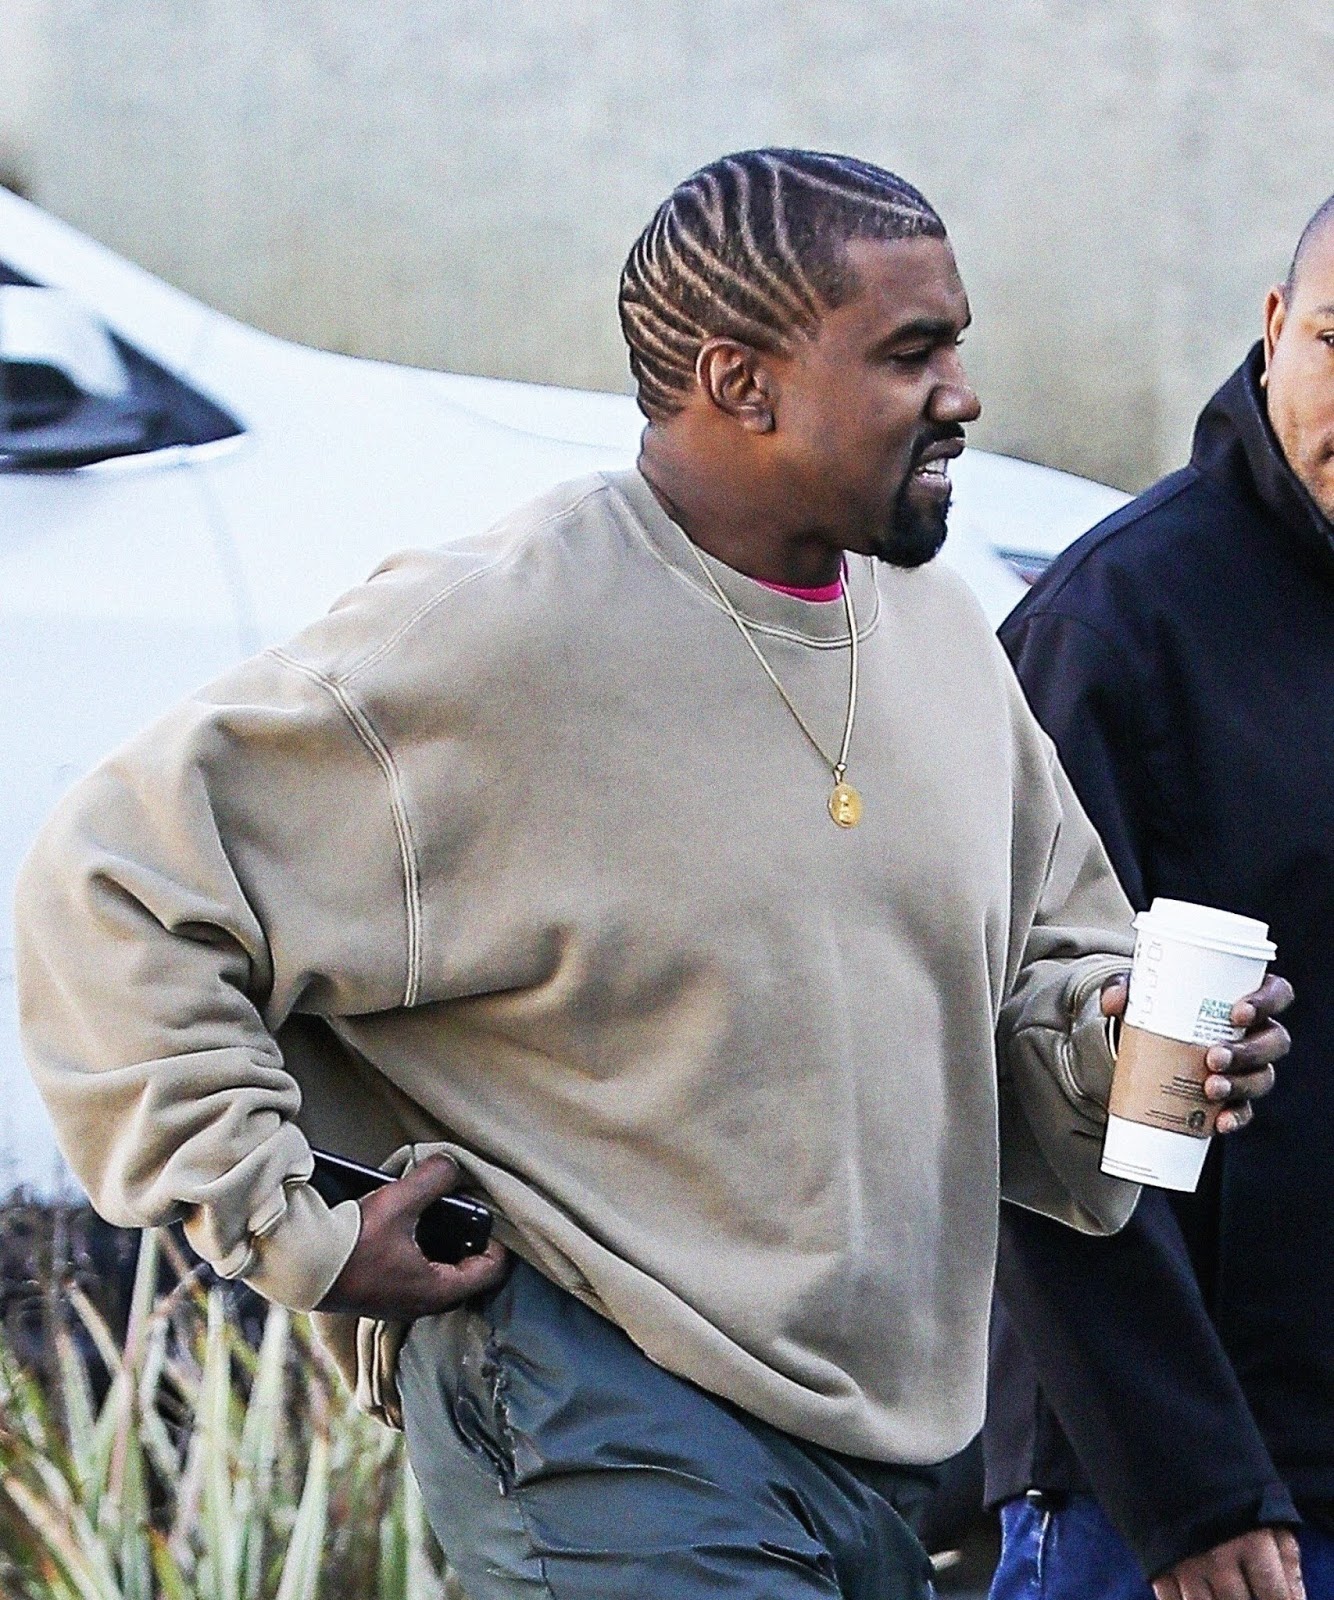 Check Out Kanye West’s New Hairstyle [Photos]